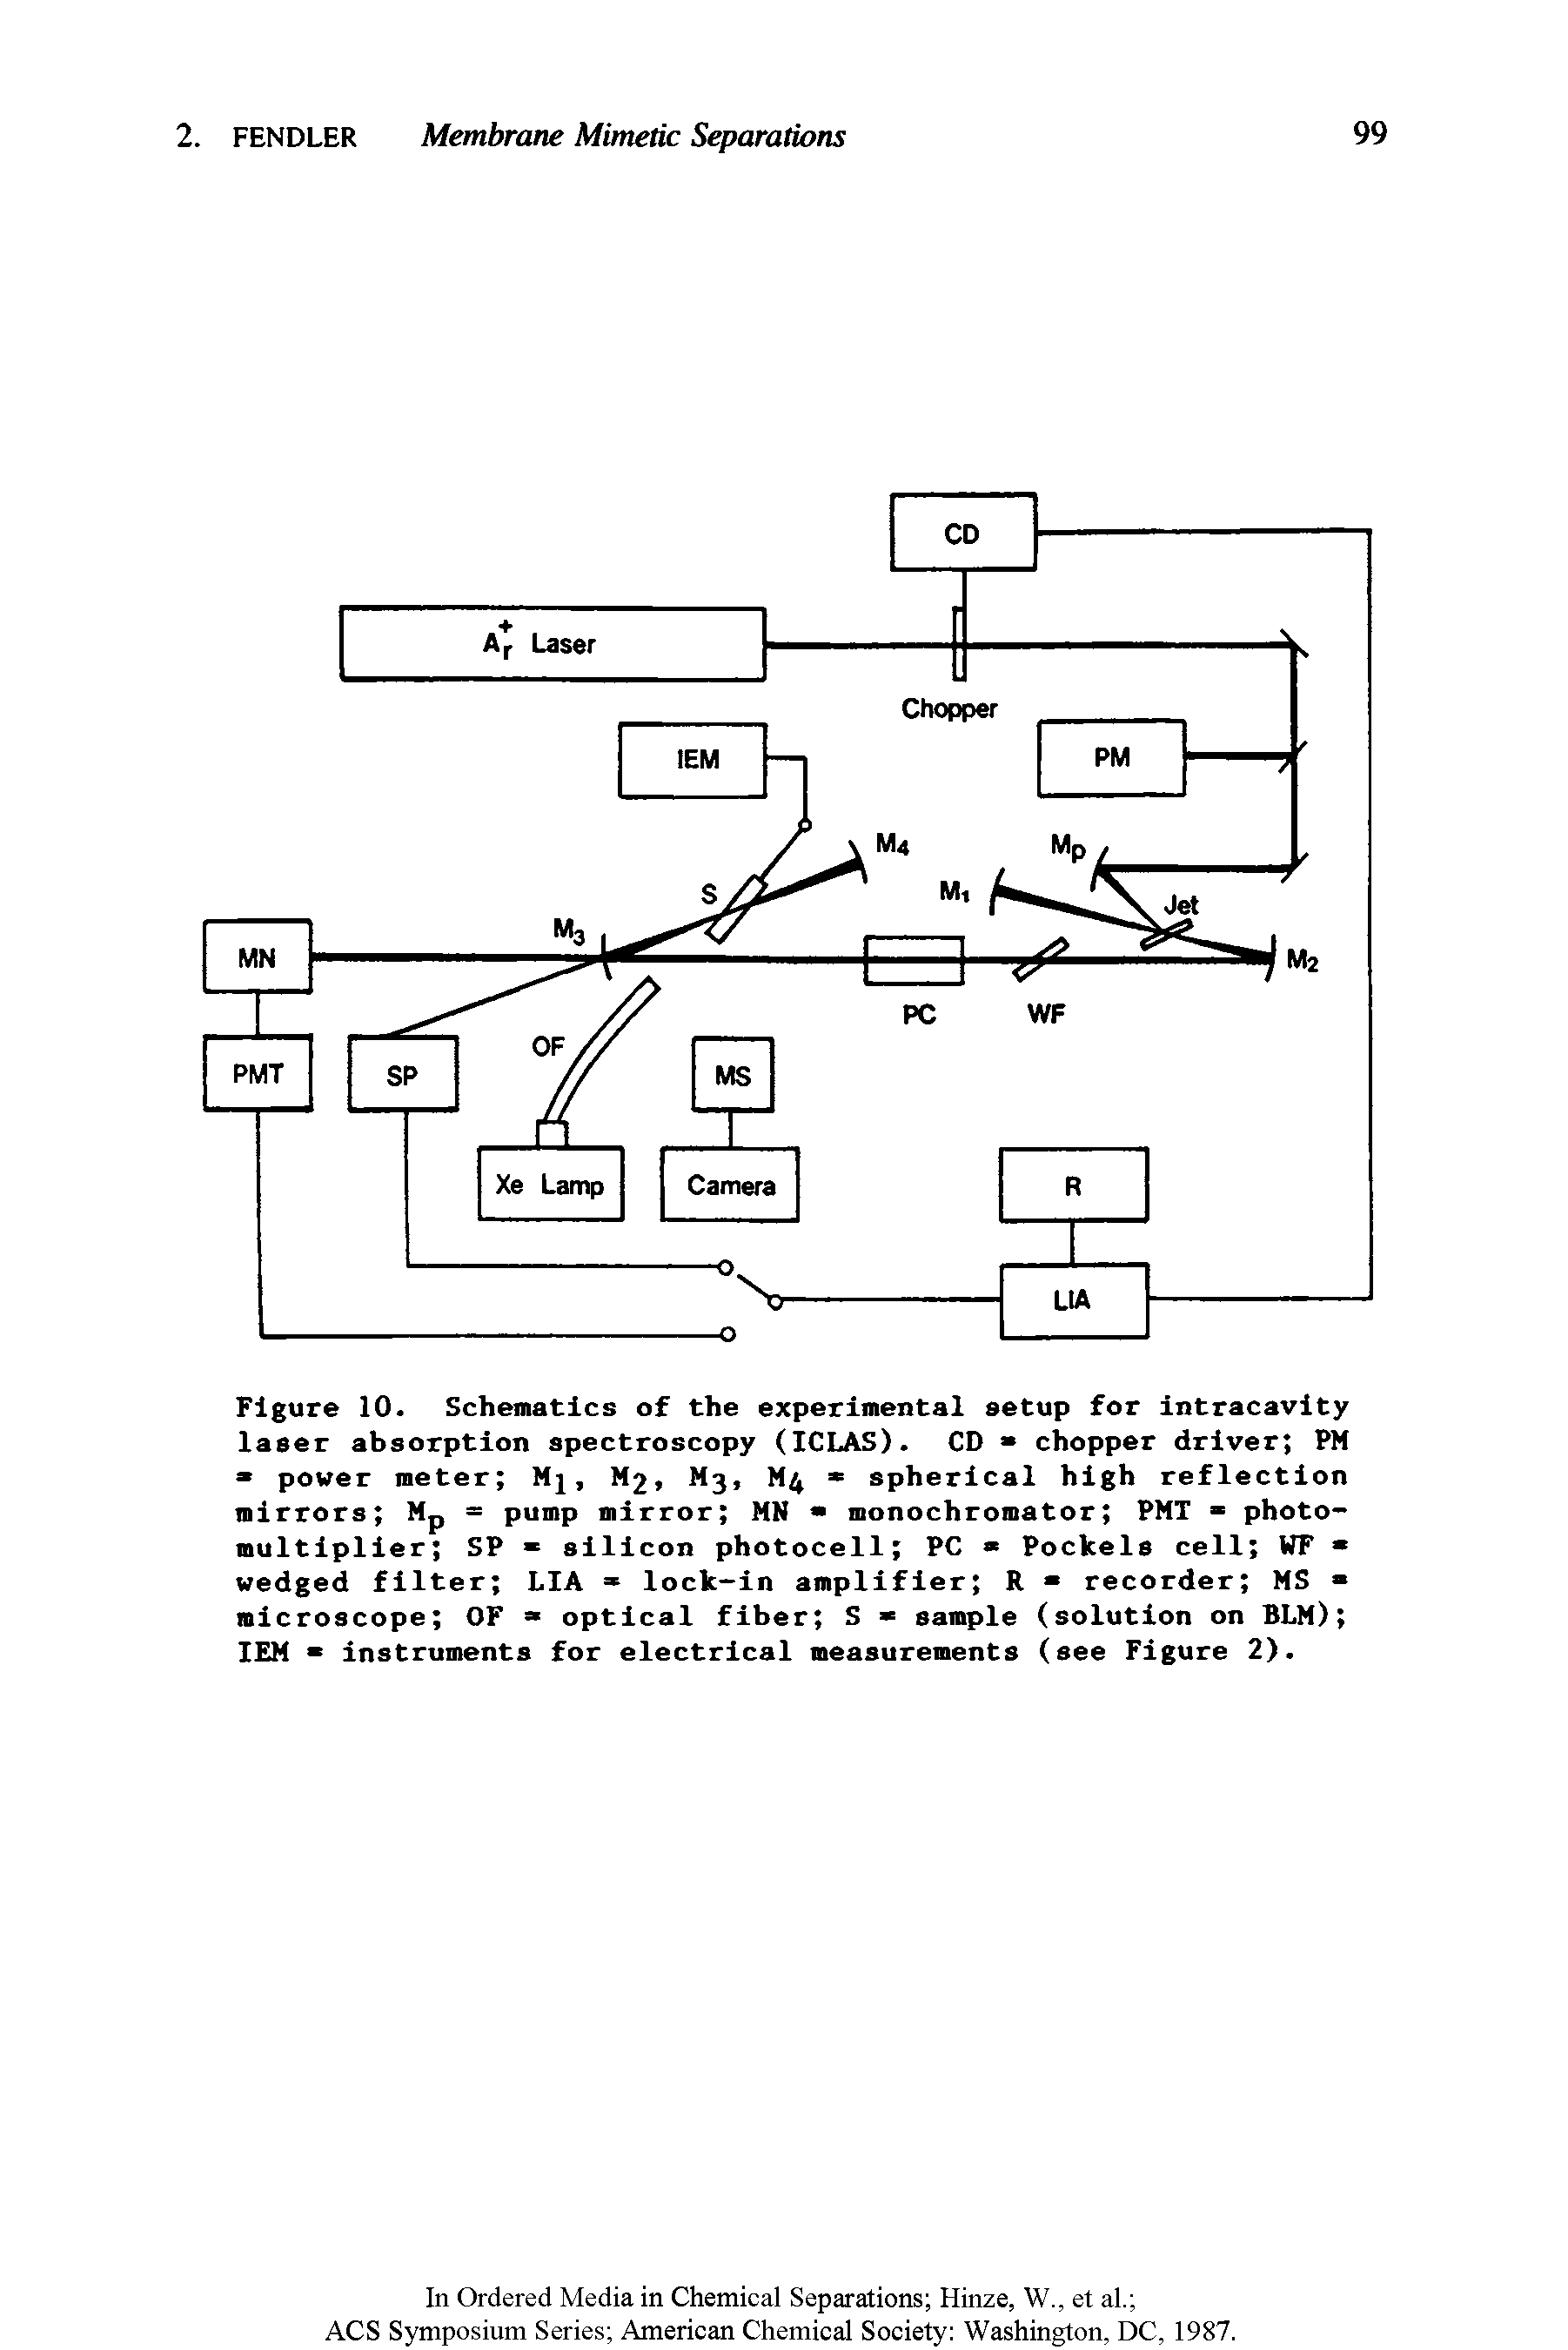 Figure 10. Schematics of the experimental setup for intracavity laser absorption spectroscopy (ICLAS). CD chopper driver PM power meter Mj, M2, M3, M4 spherical high reflection mirrors Mp = pump mirror MN monochromator PMT photomultiplier SP silicon photocell PC Pockels cell WF wedged filter LIA lock-in amplifier R recorder MS microscope OF optical fiber S sample (solution on BLM) IEM instruments for electrical measurements (see Figure 2).